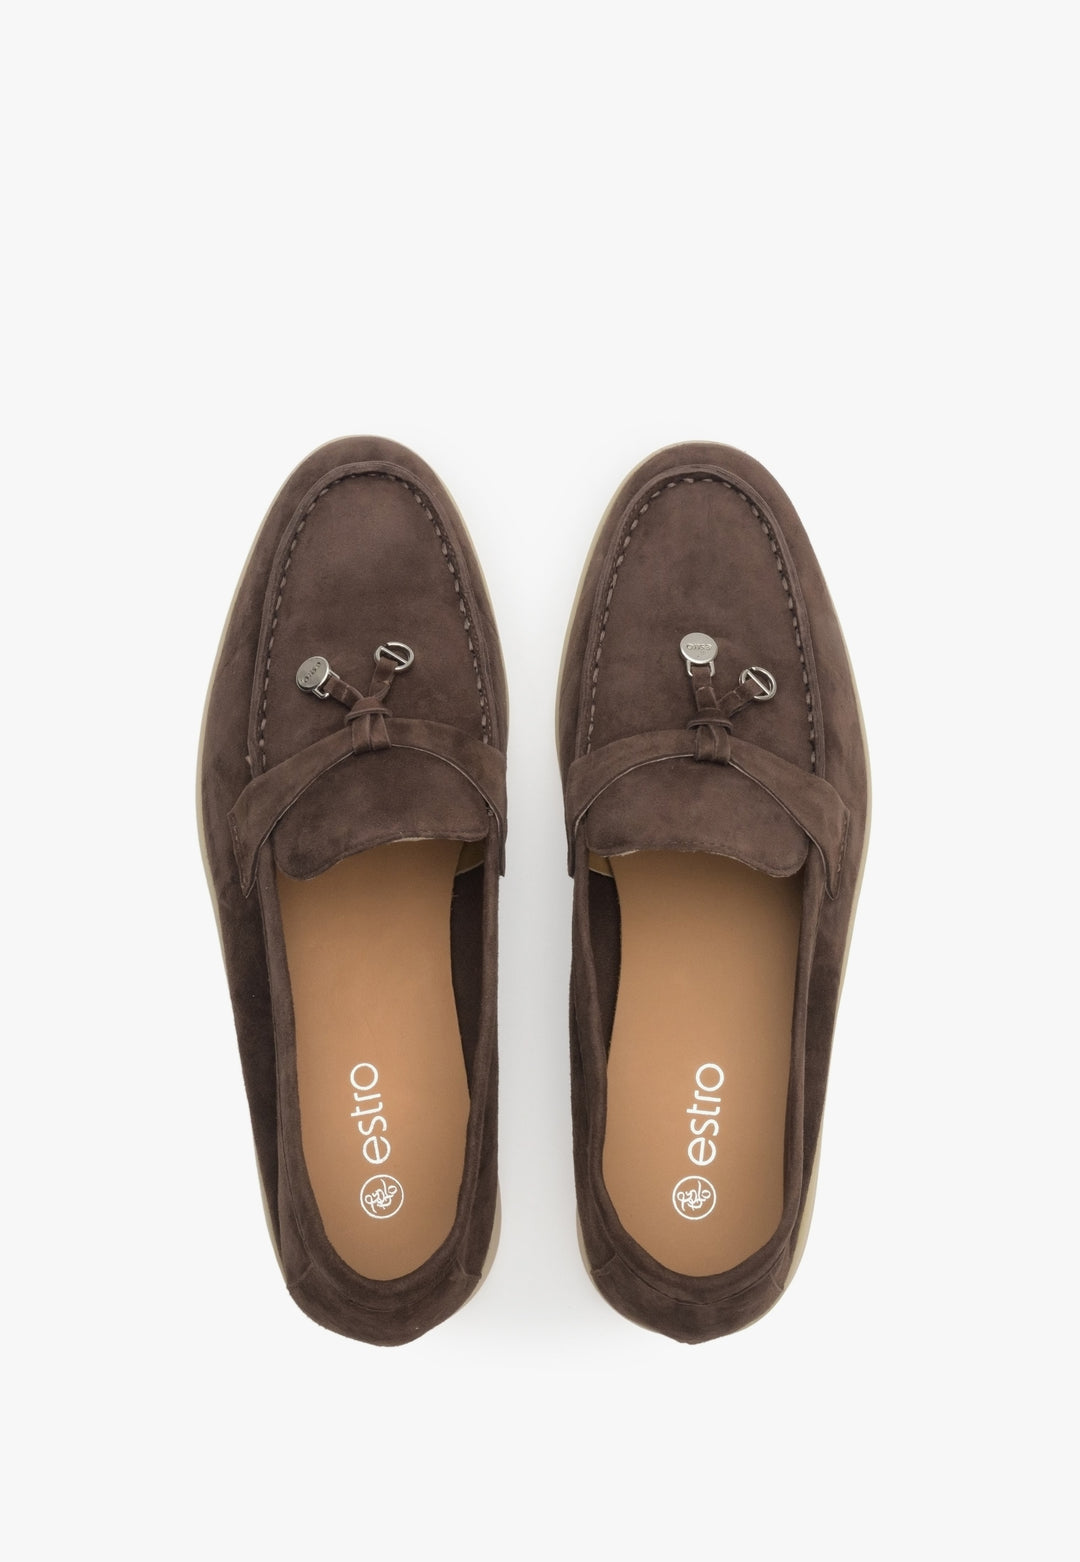 Saddle brown women's loafers of Estro brand made of velour and leather - presentation of the footwear from above.